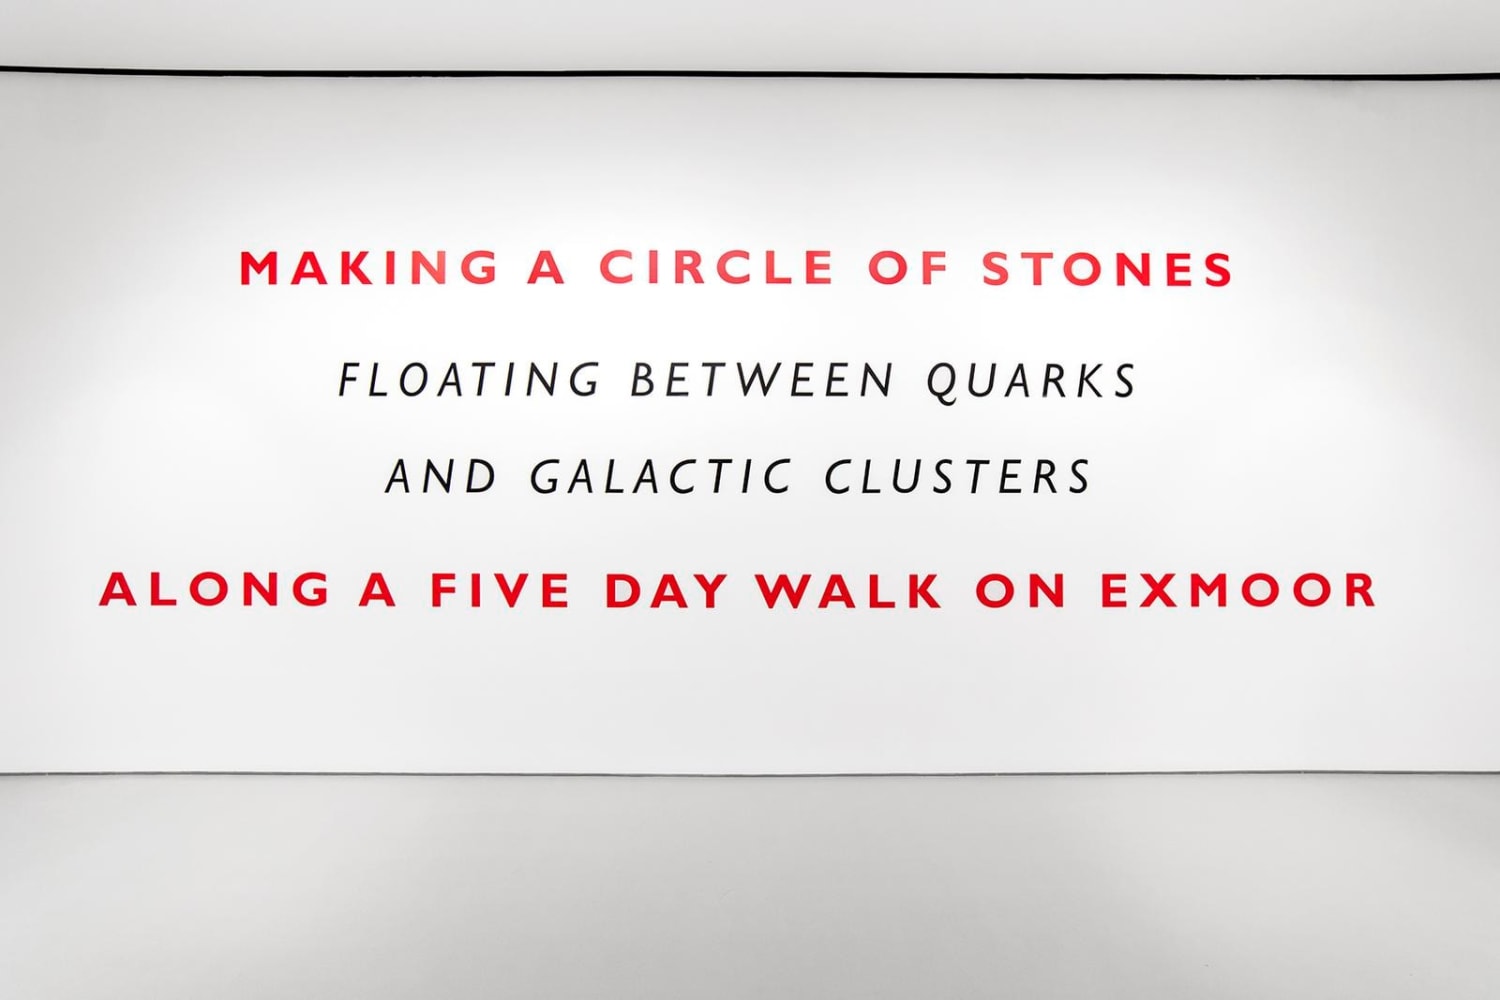 Richard&amp;nbsp;Long
Making a Circle of Stones, 2019
text
104 x 282 inches (264,2 x 716,3 cm) as installed
framed text: 41 3/4 x 63 1/8 inches (106 x 160,3 cm)